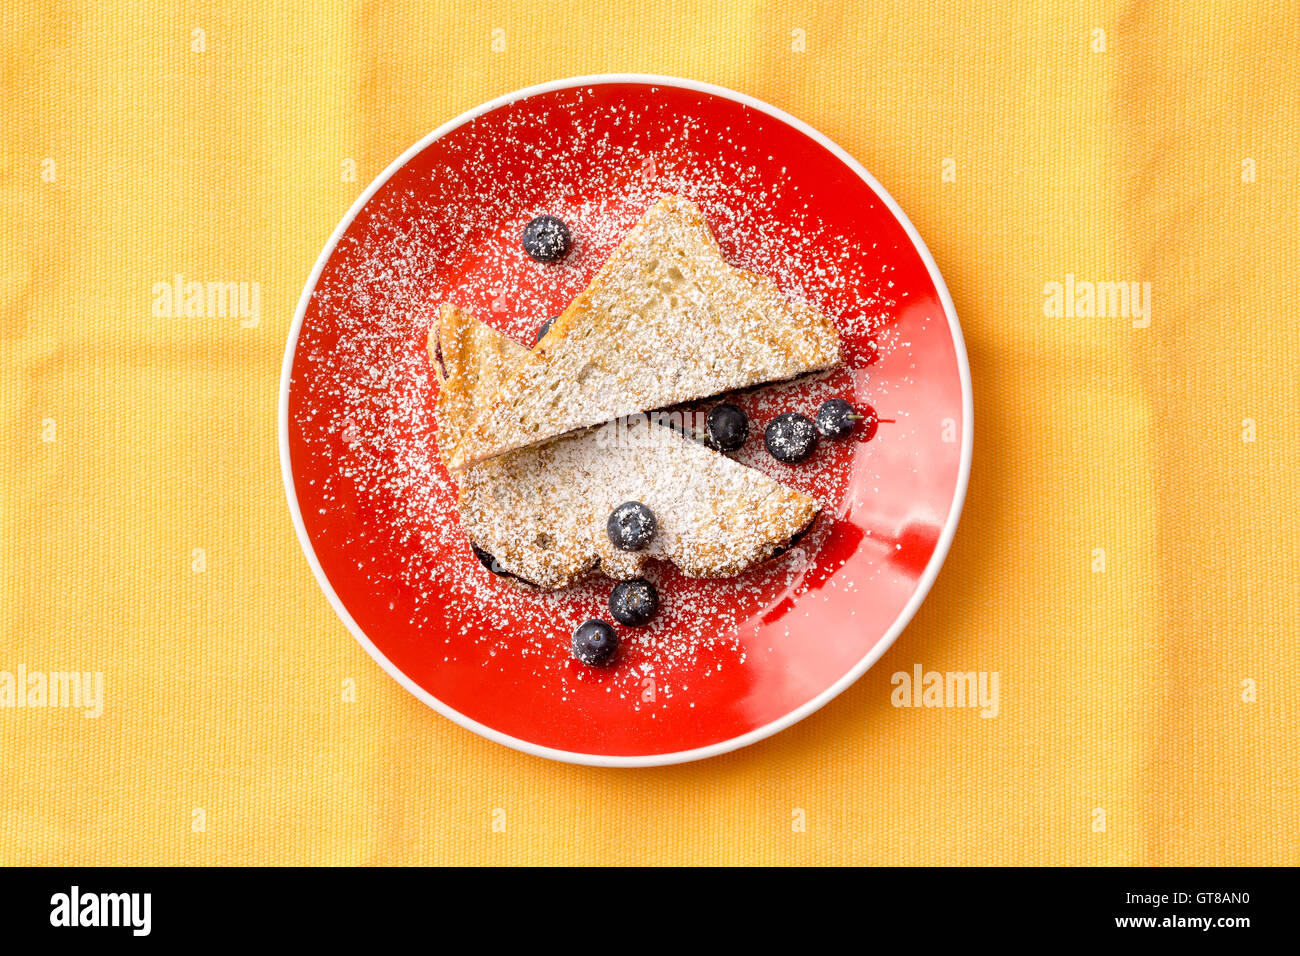 Aerial Shot of a Tasty French Toast Bread with Strawberry Jam Filling on Round Red Plate with Blueberry Fruits. Isolated on Yell Stock Photo